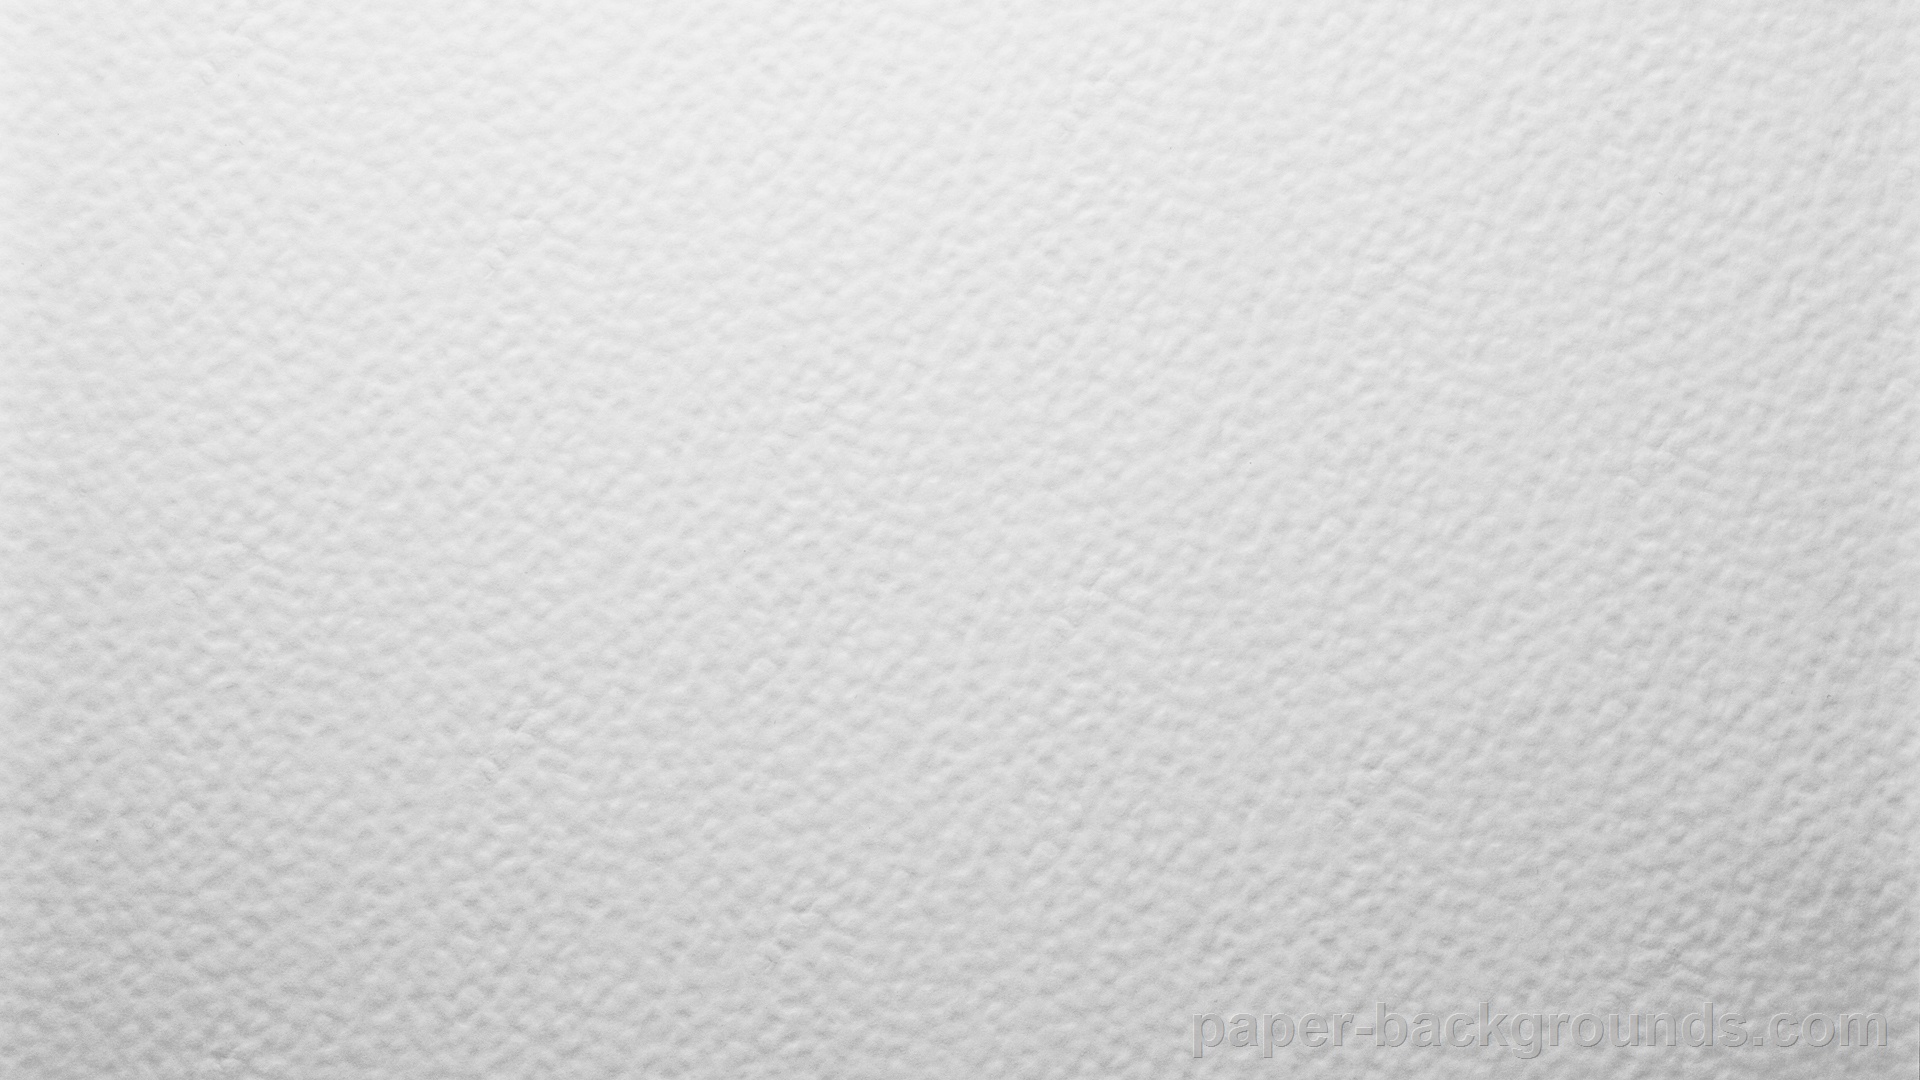 Free download white paper texture hd Paper Backgrounds [1920x1080] for ...